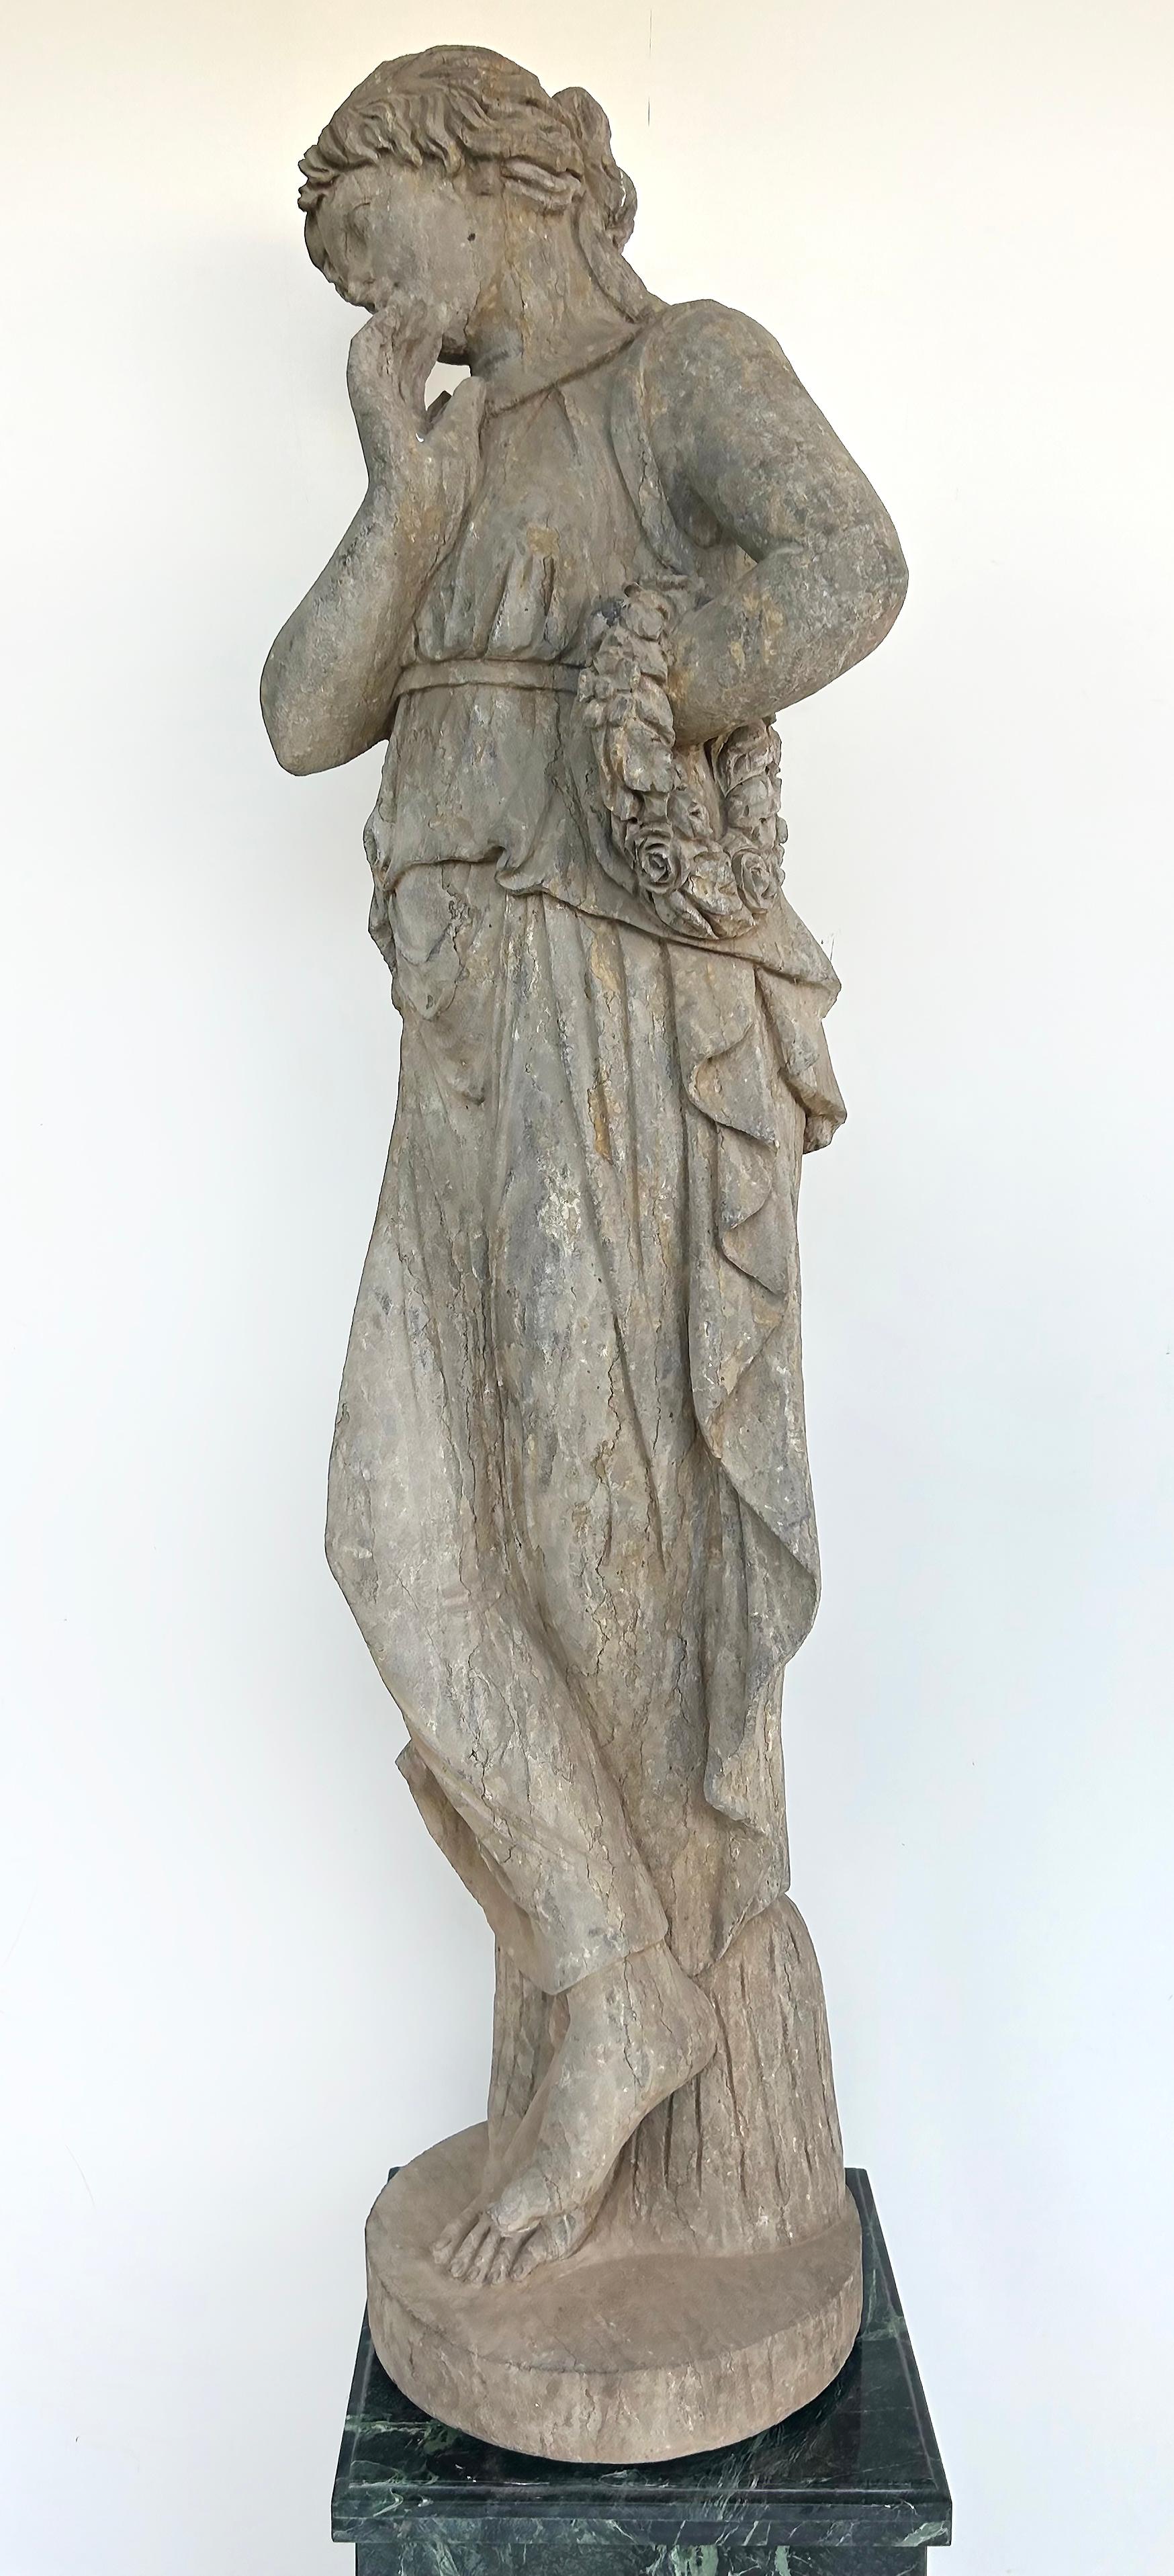 Lifesize Antique Classical Female Carved  Stone Statue on a Marble Base

Offered for sale is an antique carved stone classical figurative sculpture of a woman or possibly a dancer posing while leaning on a tree stump or pedestal. 
 This life-size